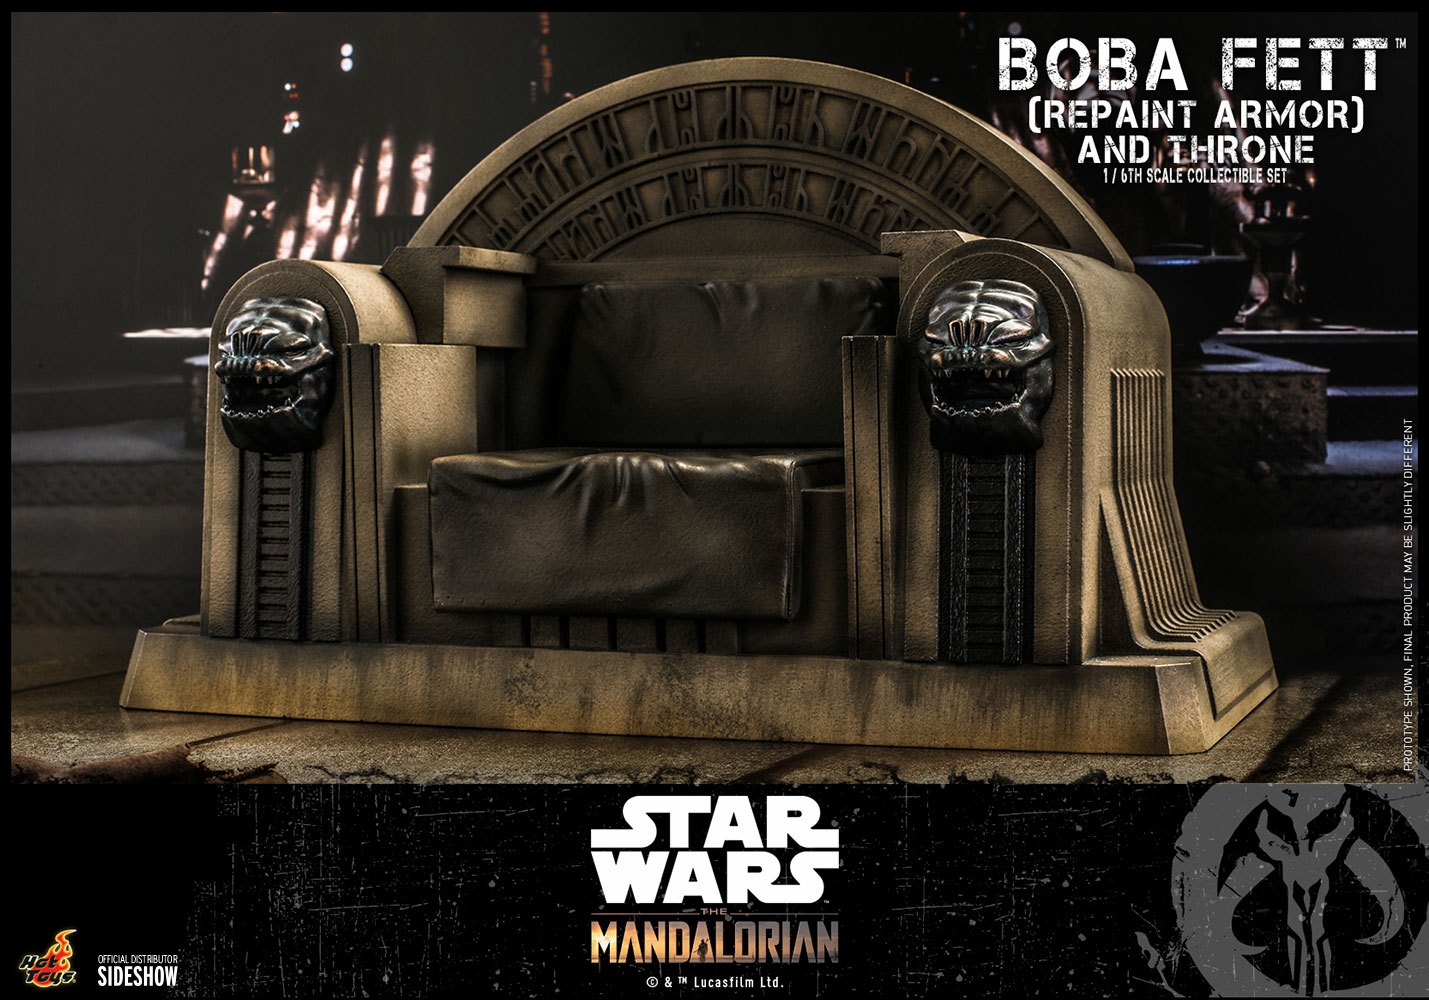 boba-fett-repaint-armor-special-edition-and-throne_star-wars_gallery_60ee529e4fa2f.jpg